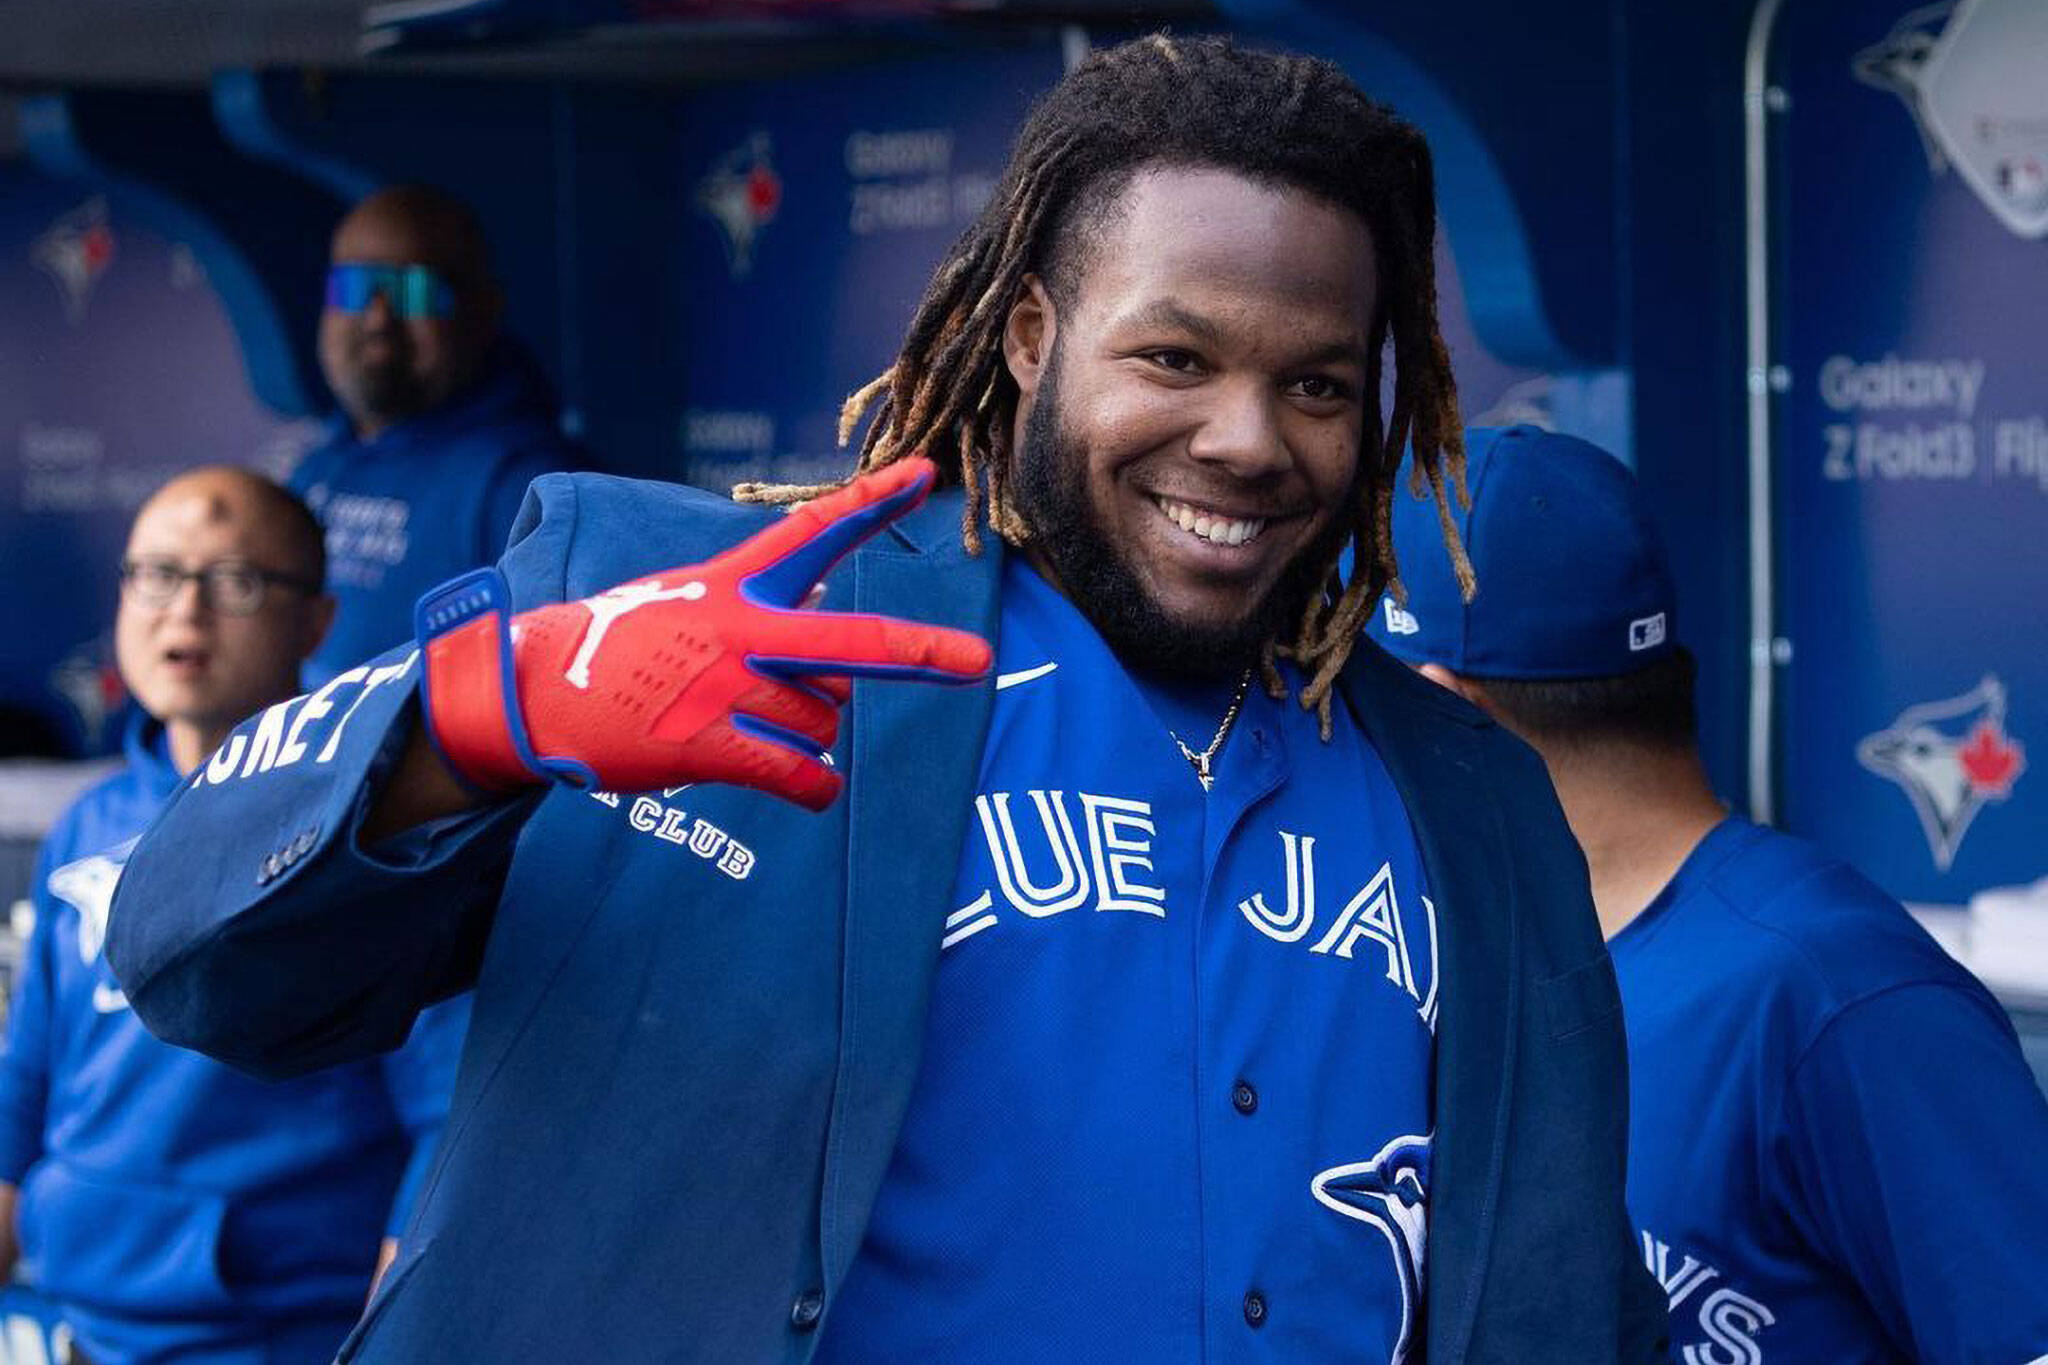 Toronto Blue Jays: Guerrero Jr. makes statement with All-Star Game MVP award